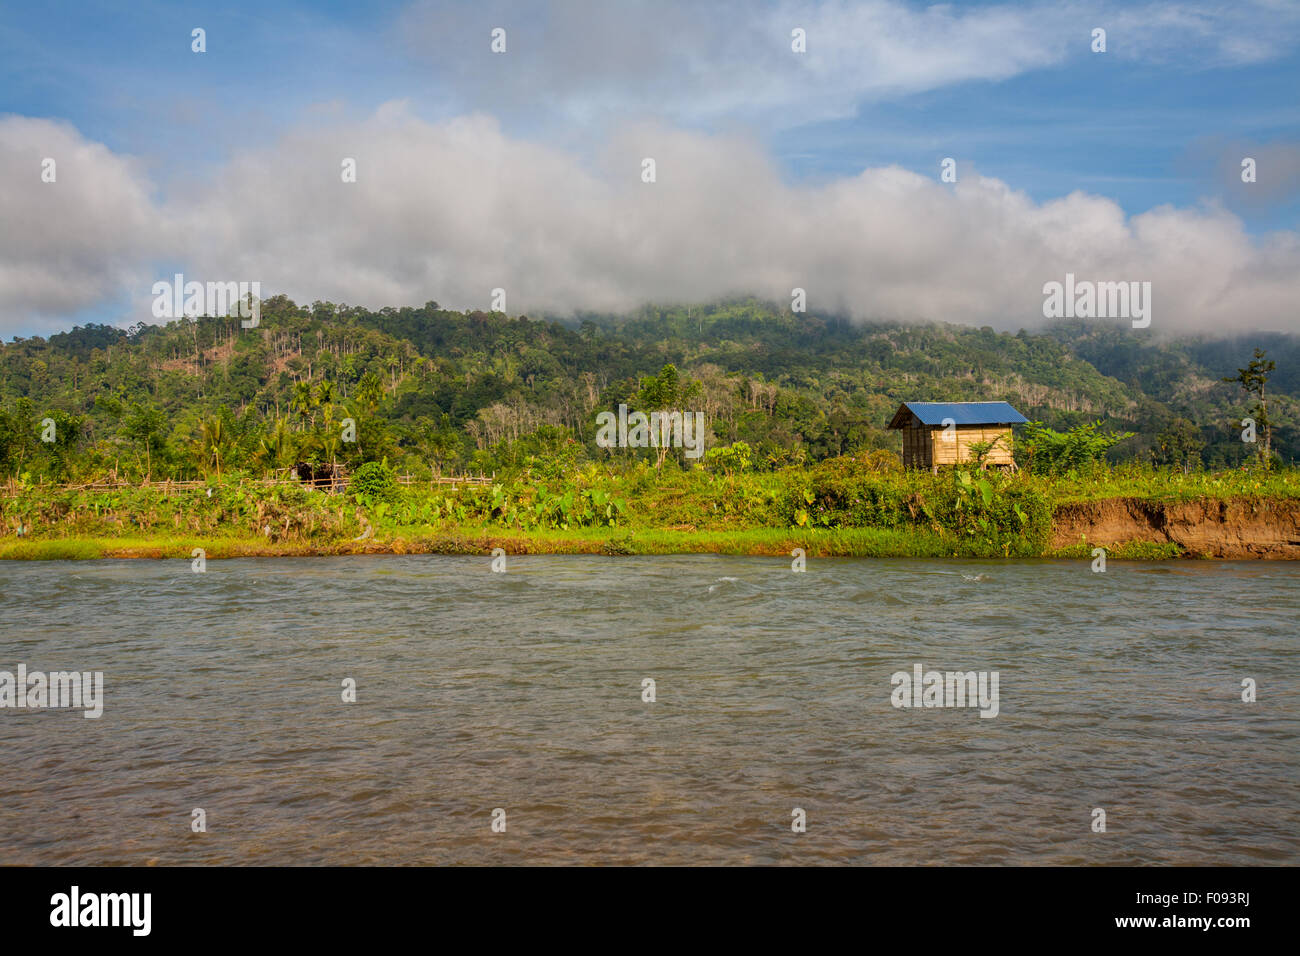 Agricultural land and a farming hut on the bank of a river near Lubuk Sikaping, Pasaman, West Sumatra, Indonesia. Stock Photo